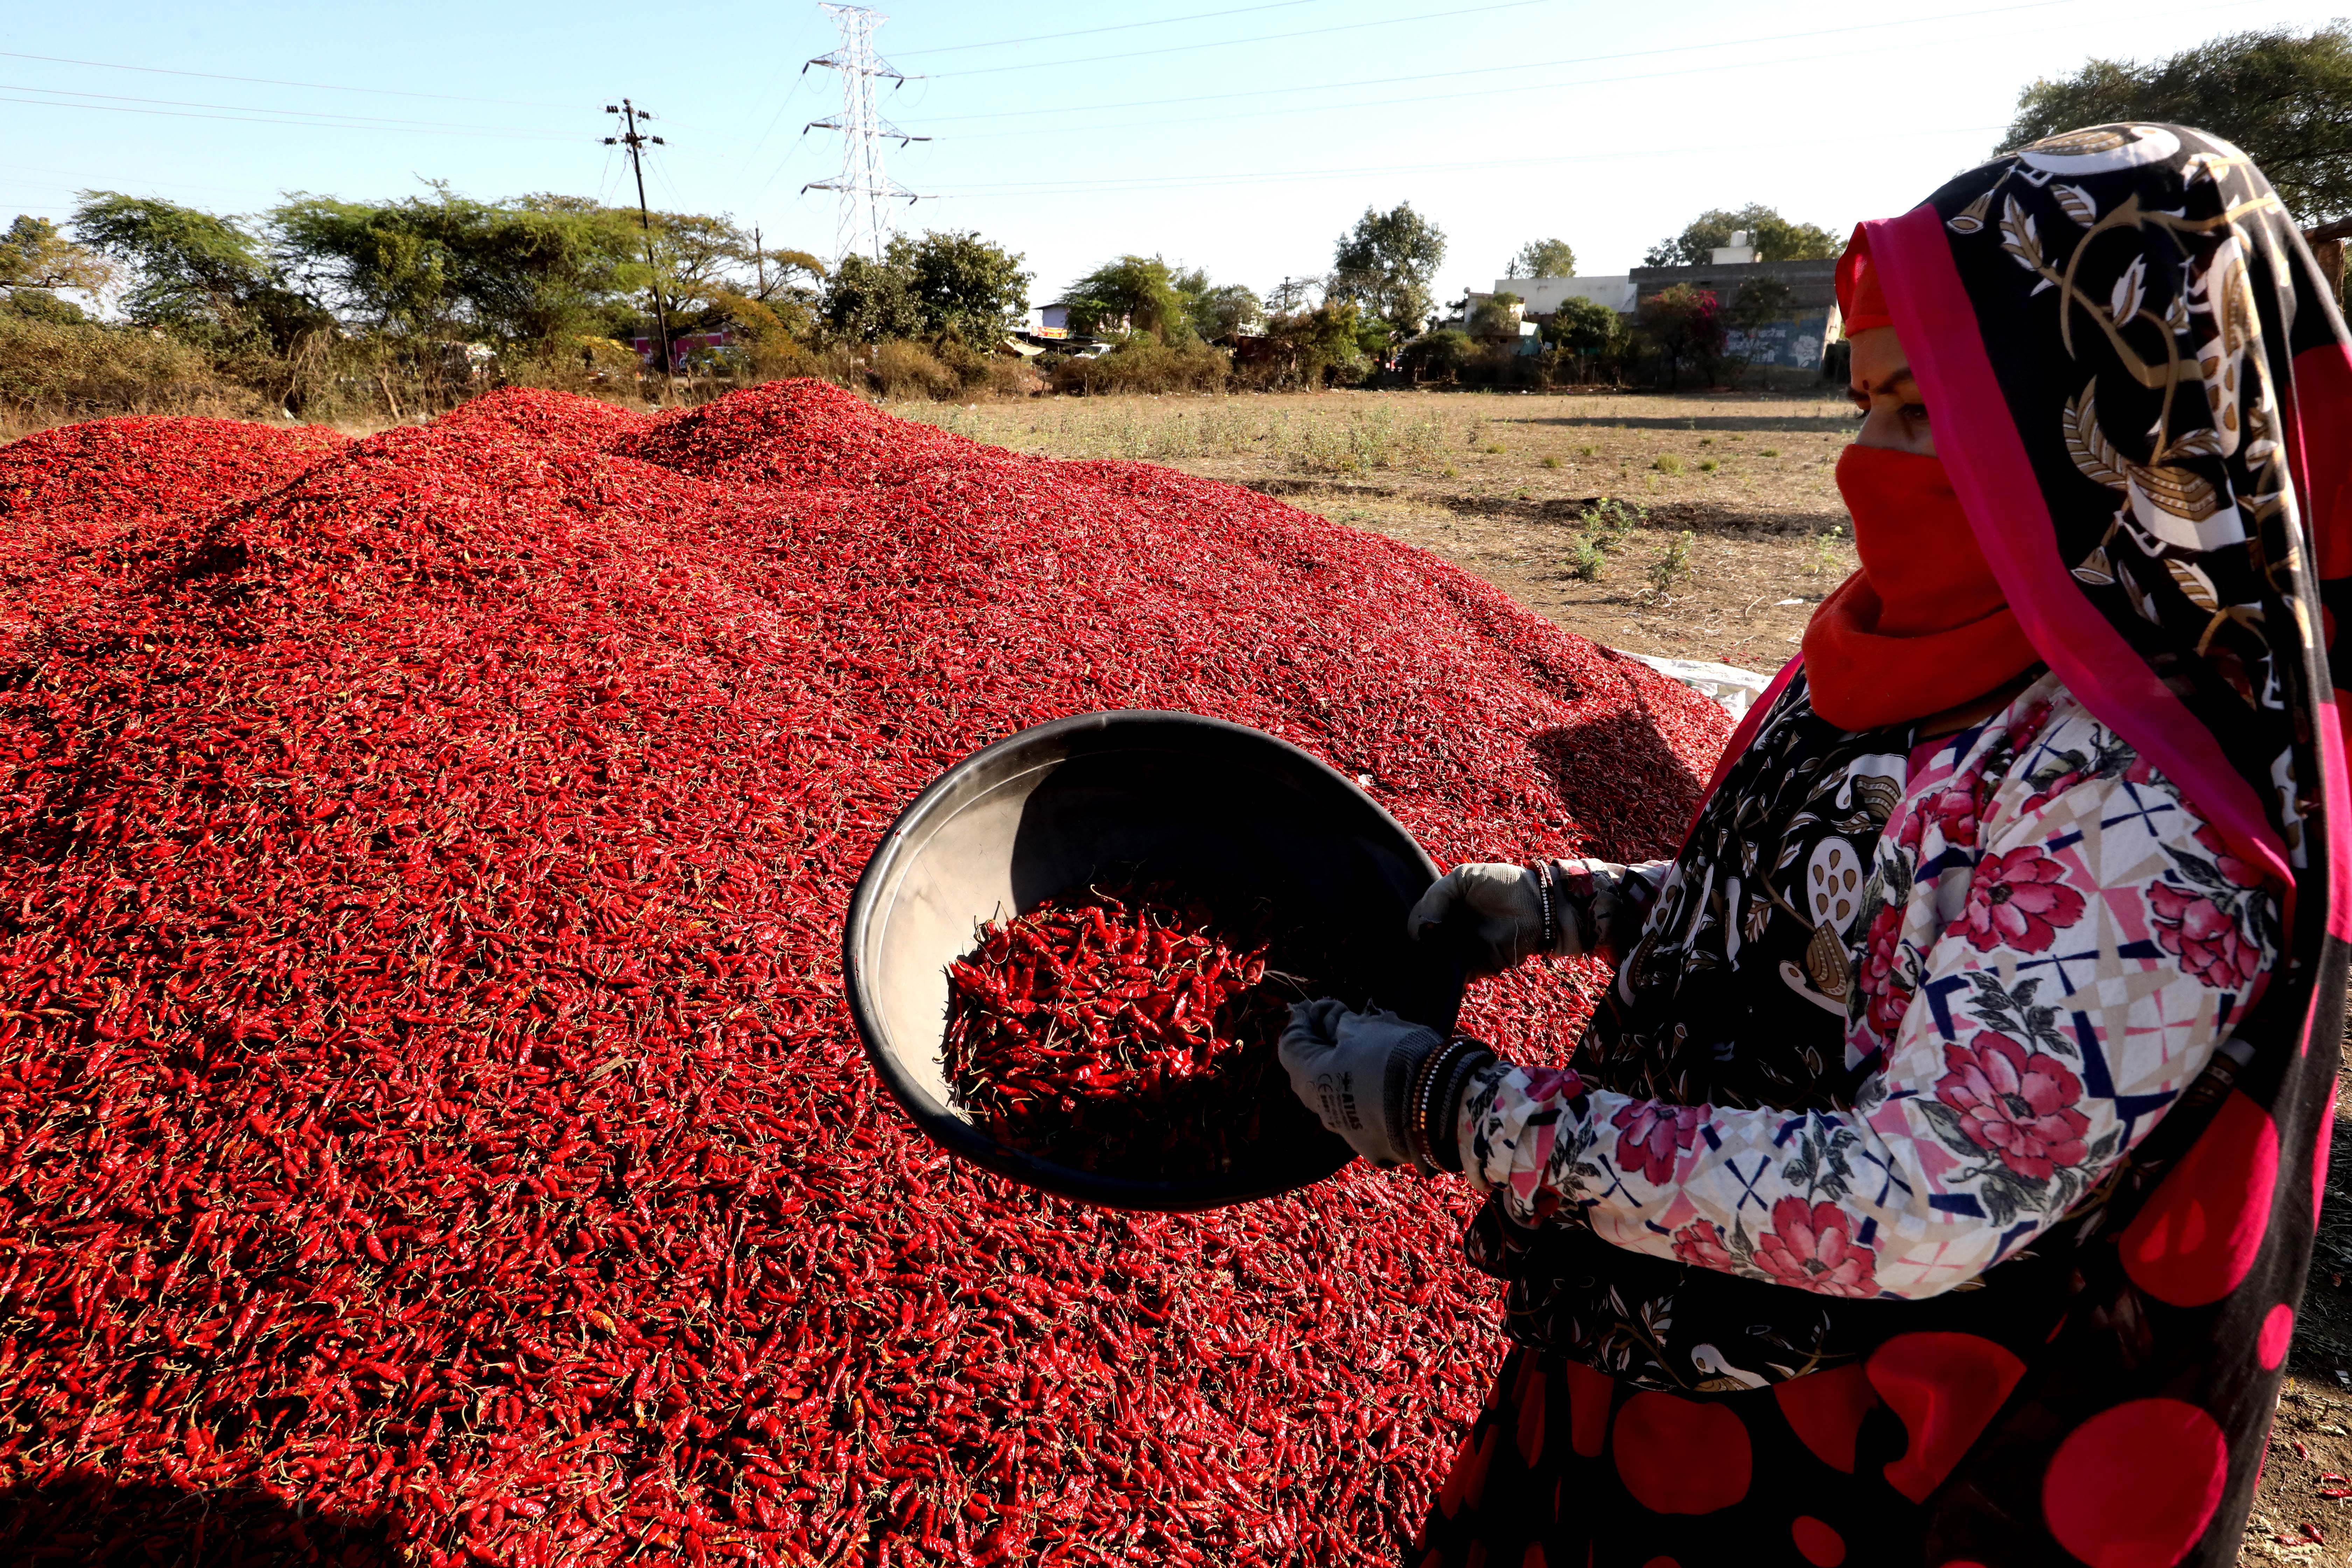 epa08997786 A worker sorts red chillies after harvesting in the fields in Indore, India, 08 February 2021 (issued 09 February 2021). The west region of Nimar in the state of Madhya Pradesh is one of the largest producers of red chillies in India. EPA-EFE/SANJEEV GUPTA